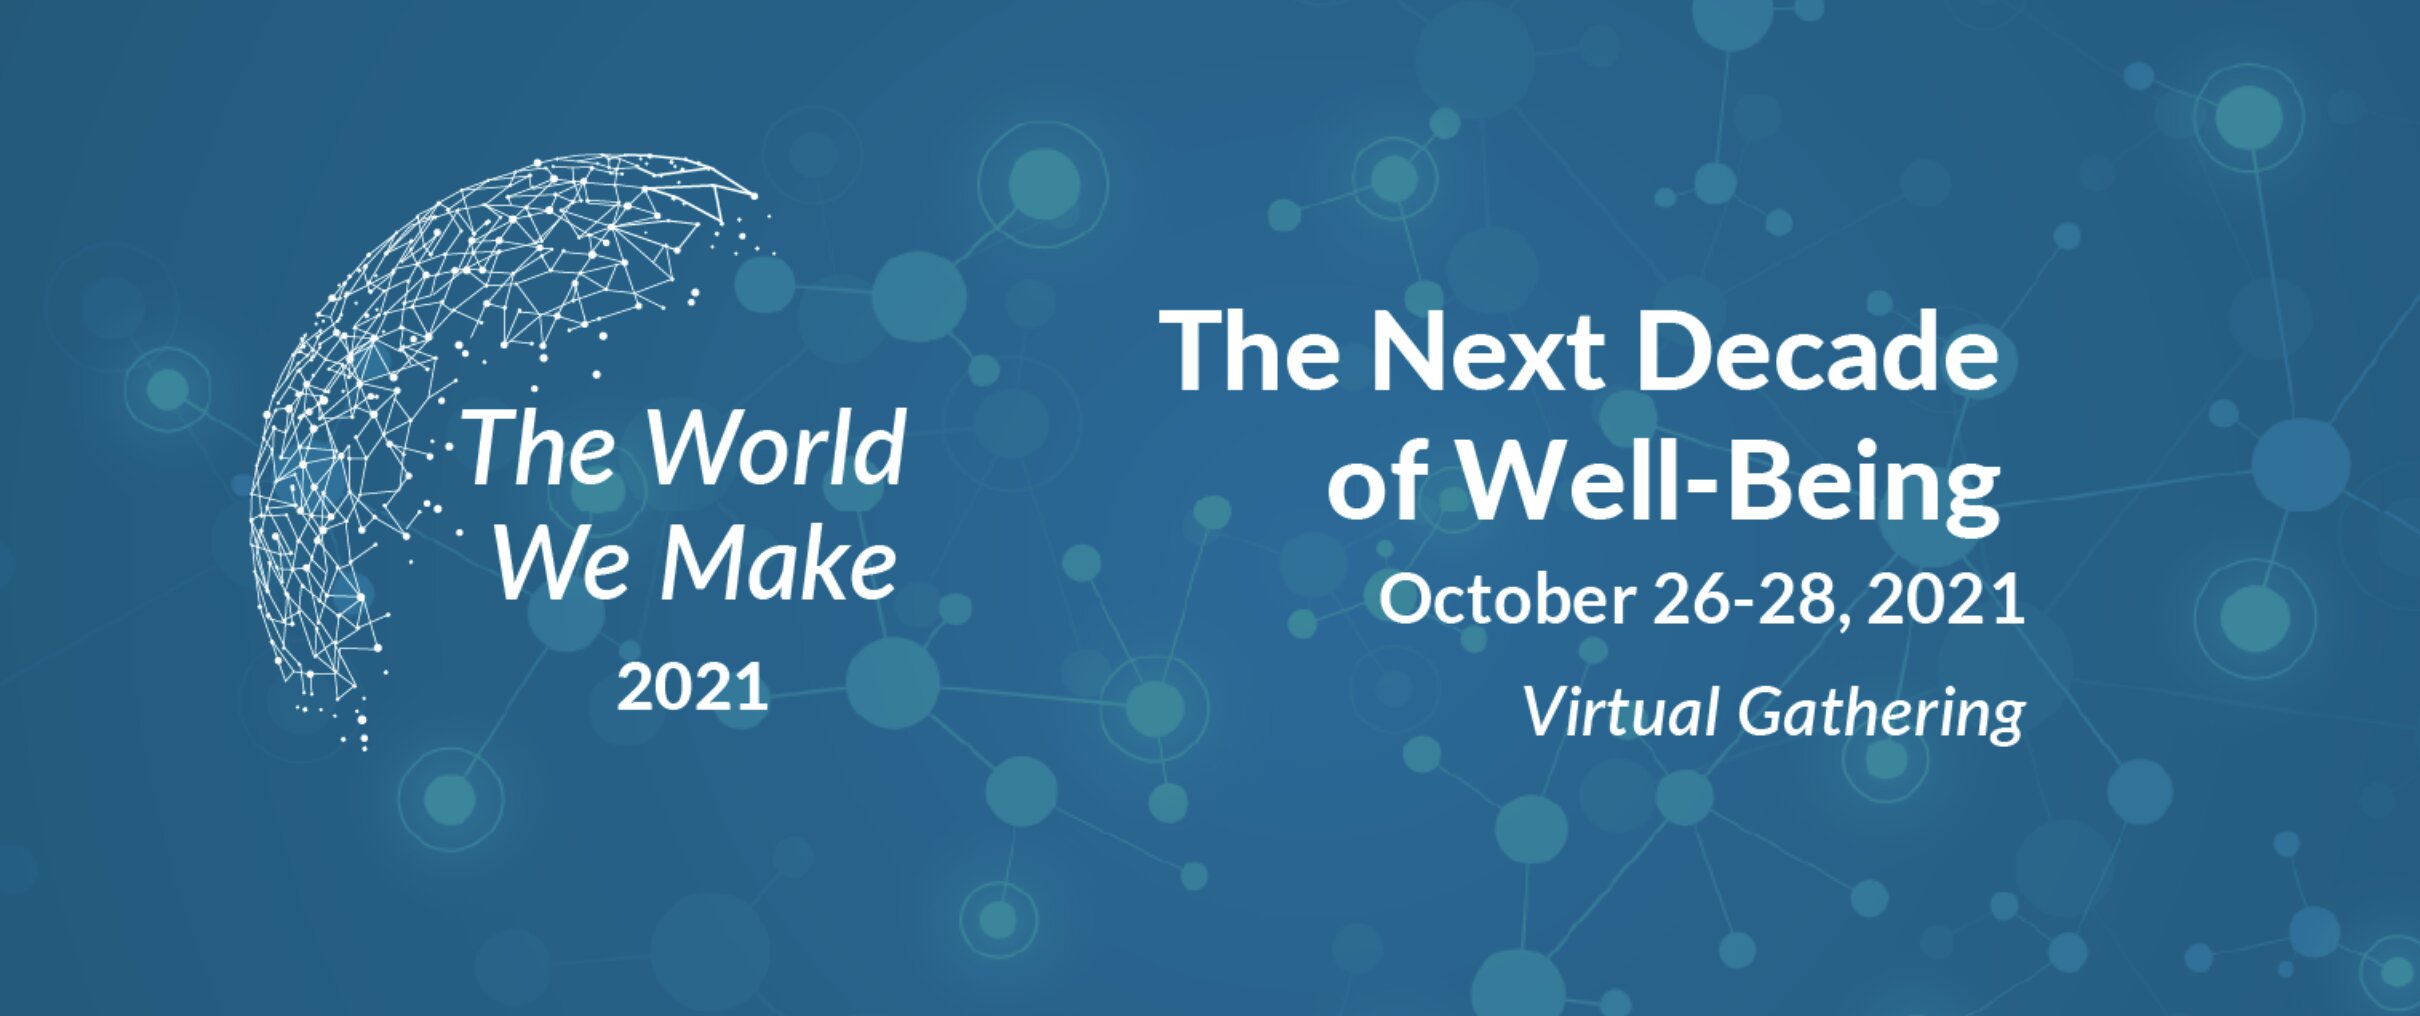 HealthyMinds Innovations: The World We Make: 2021 - A Series of 3 Free Events